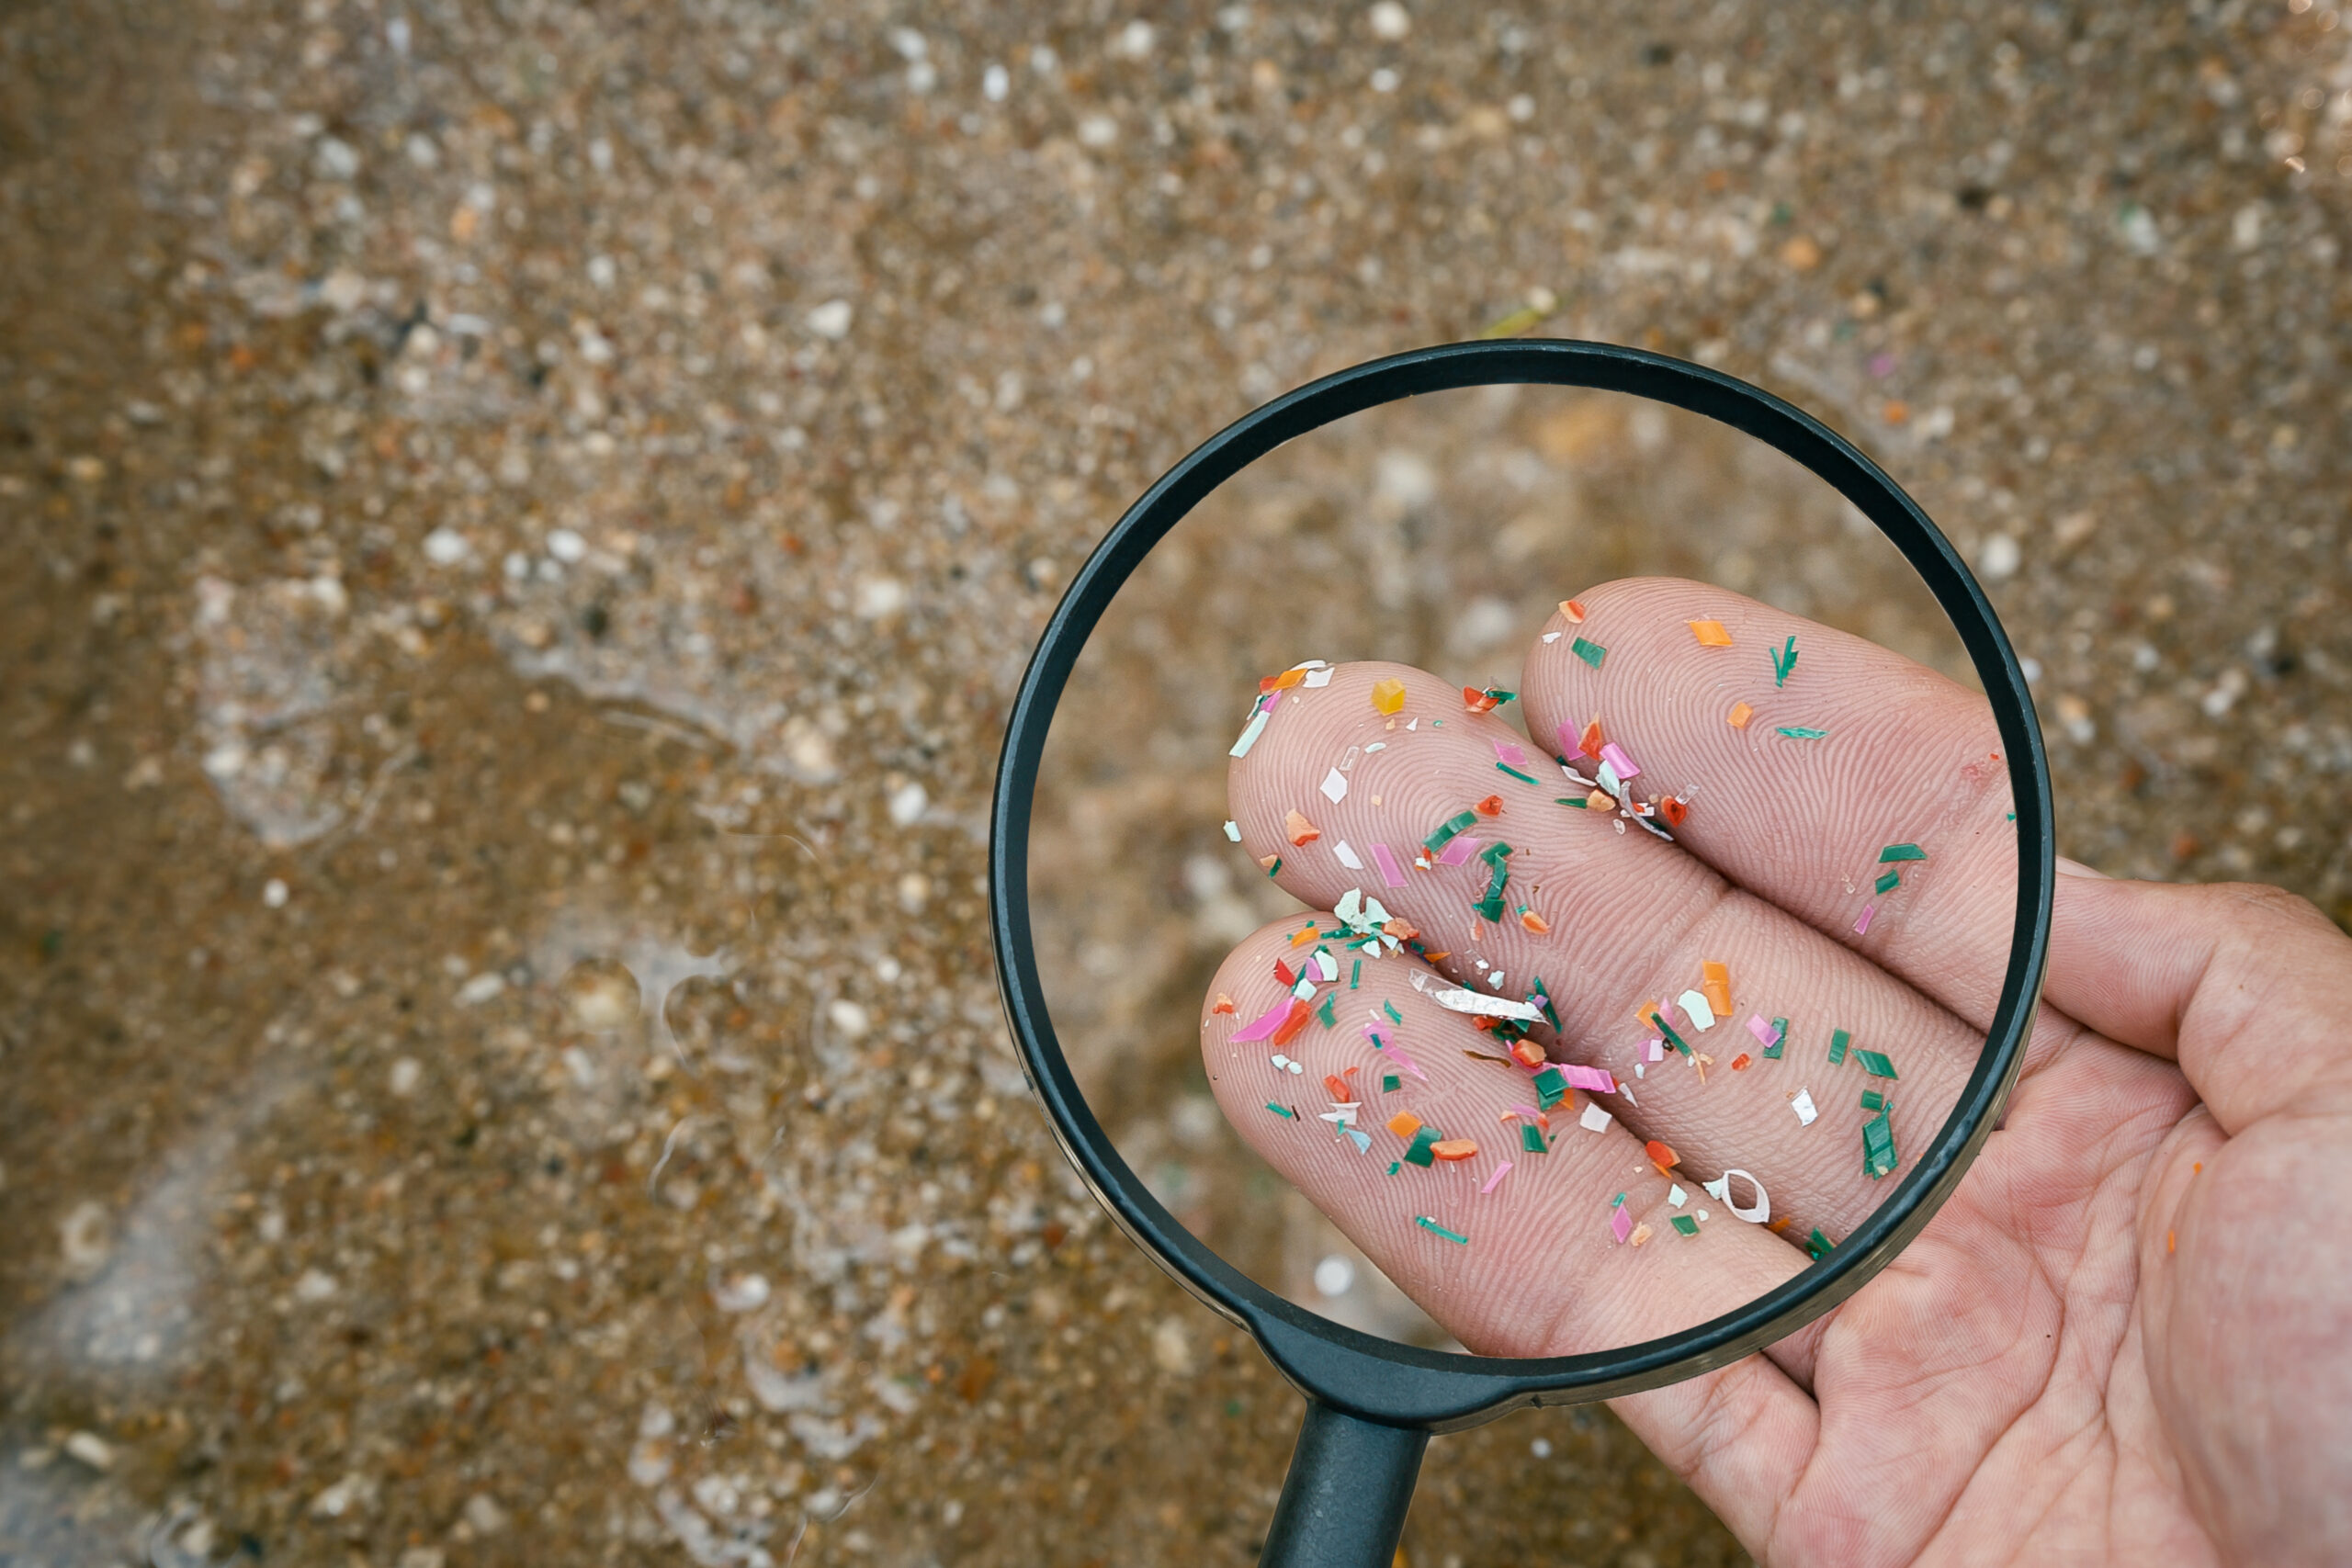 a magnifying glass over a hand showing many microplastic pieces